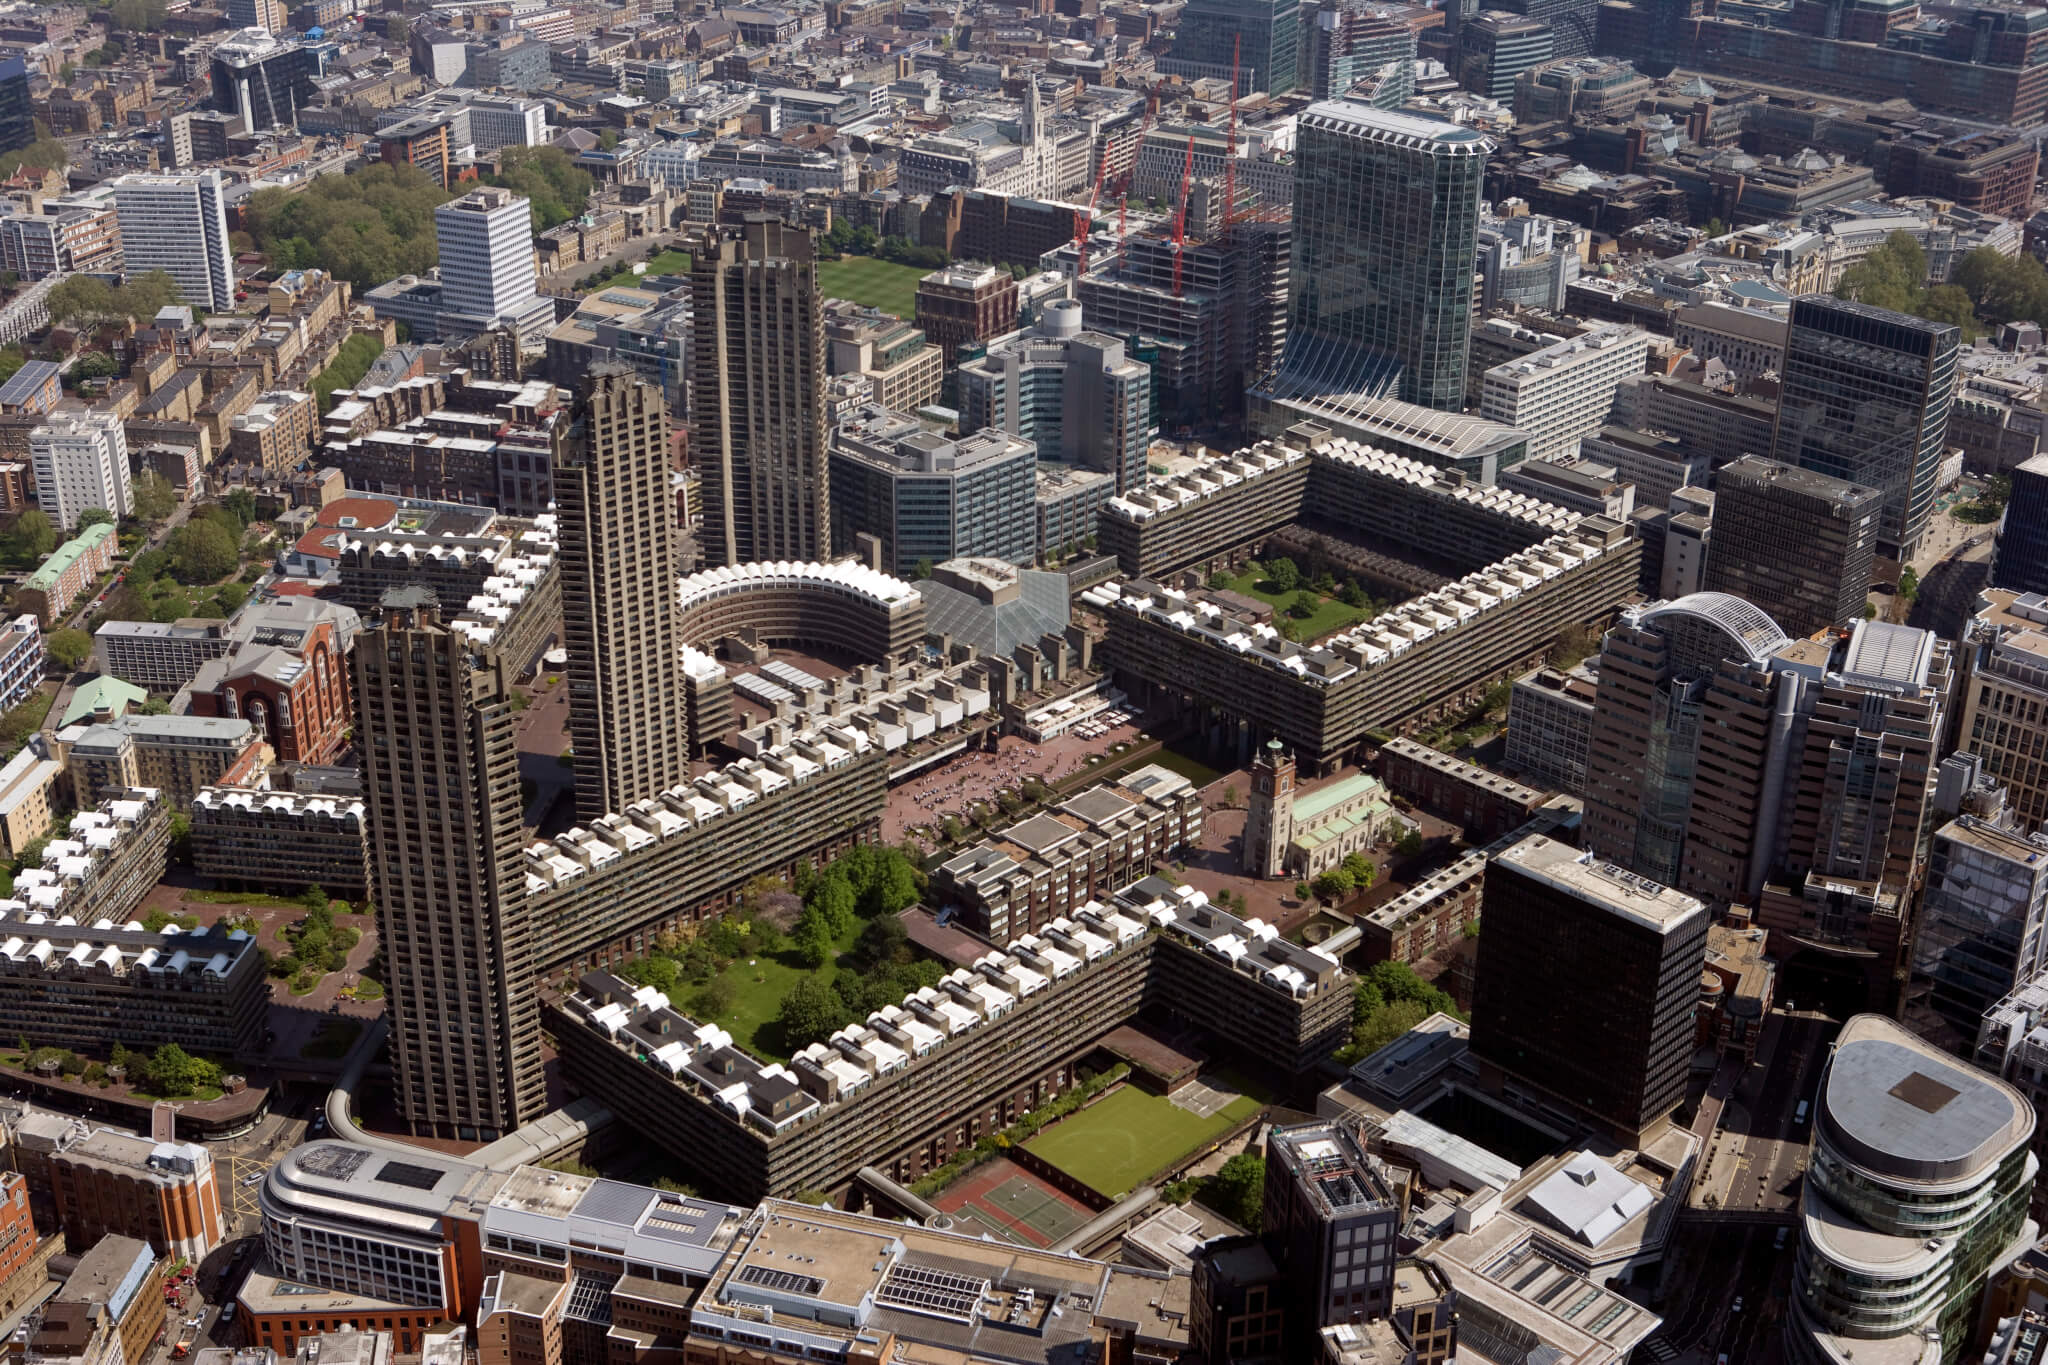 General 2048x1365 photography aerial view building Barbican London Brutalism UK England architecture cityscape city